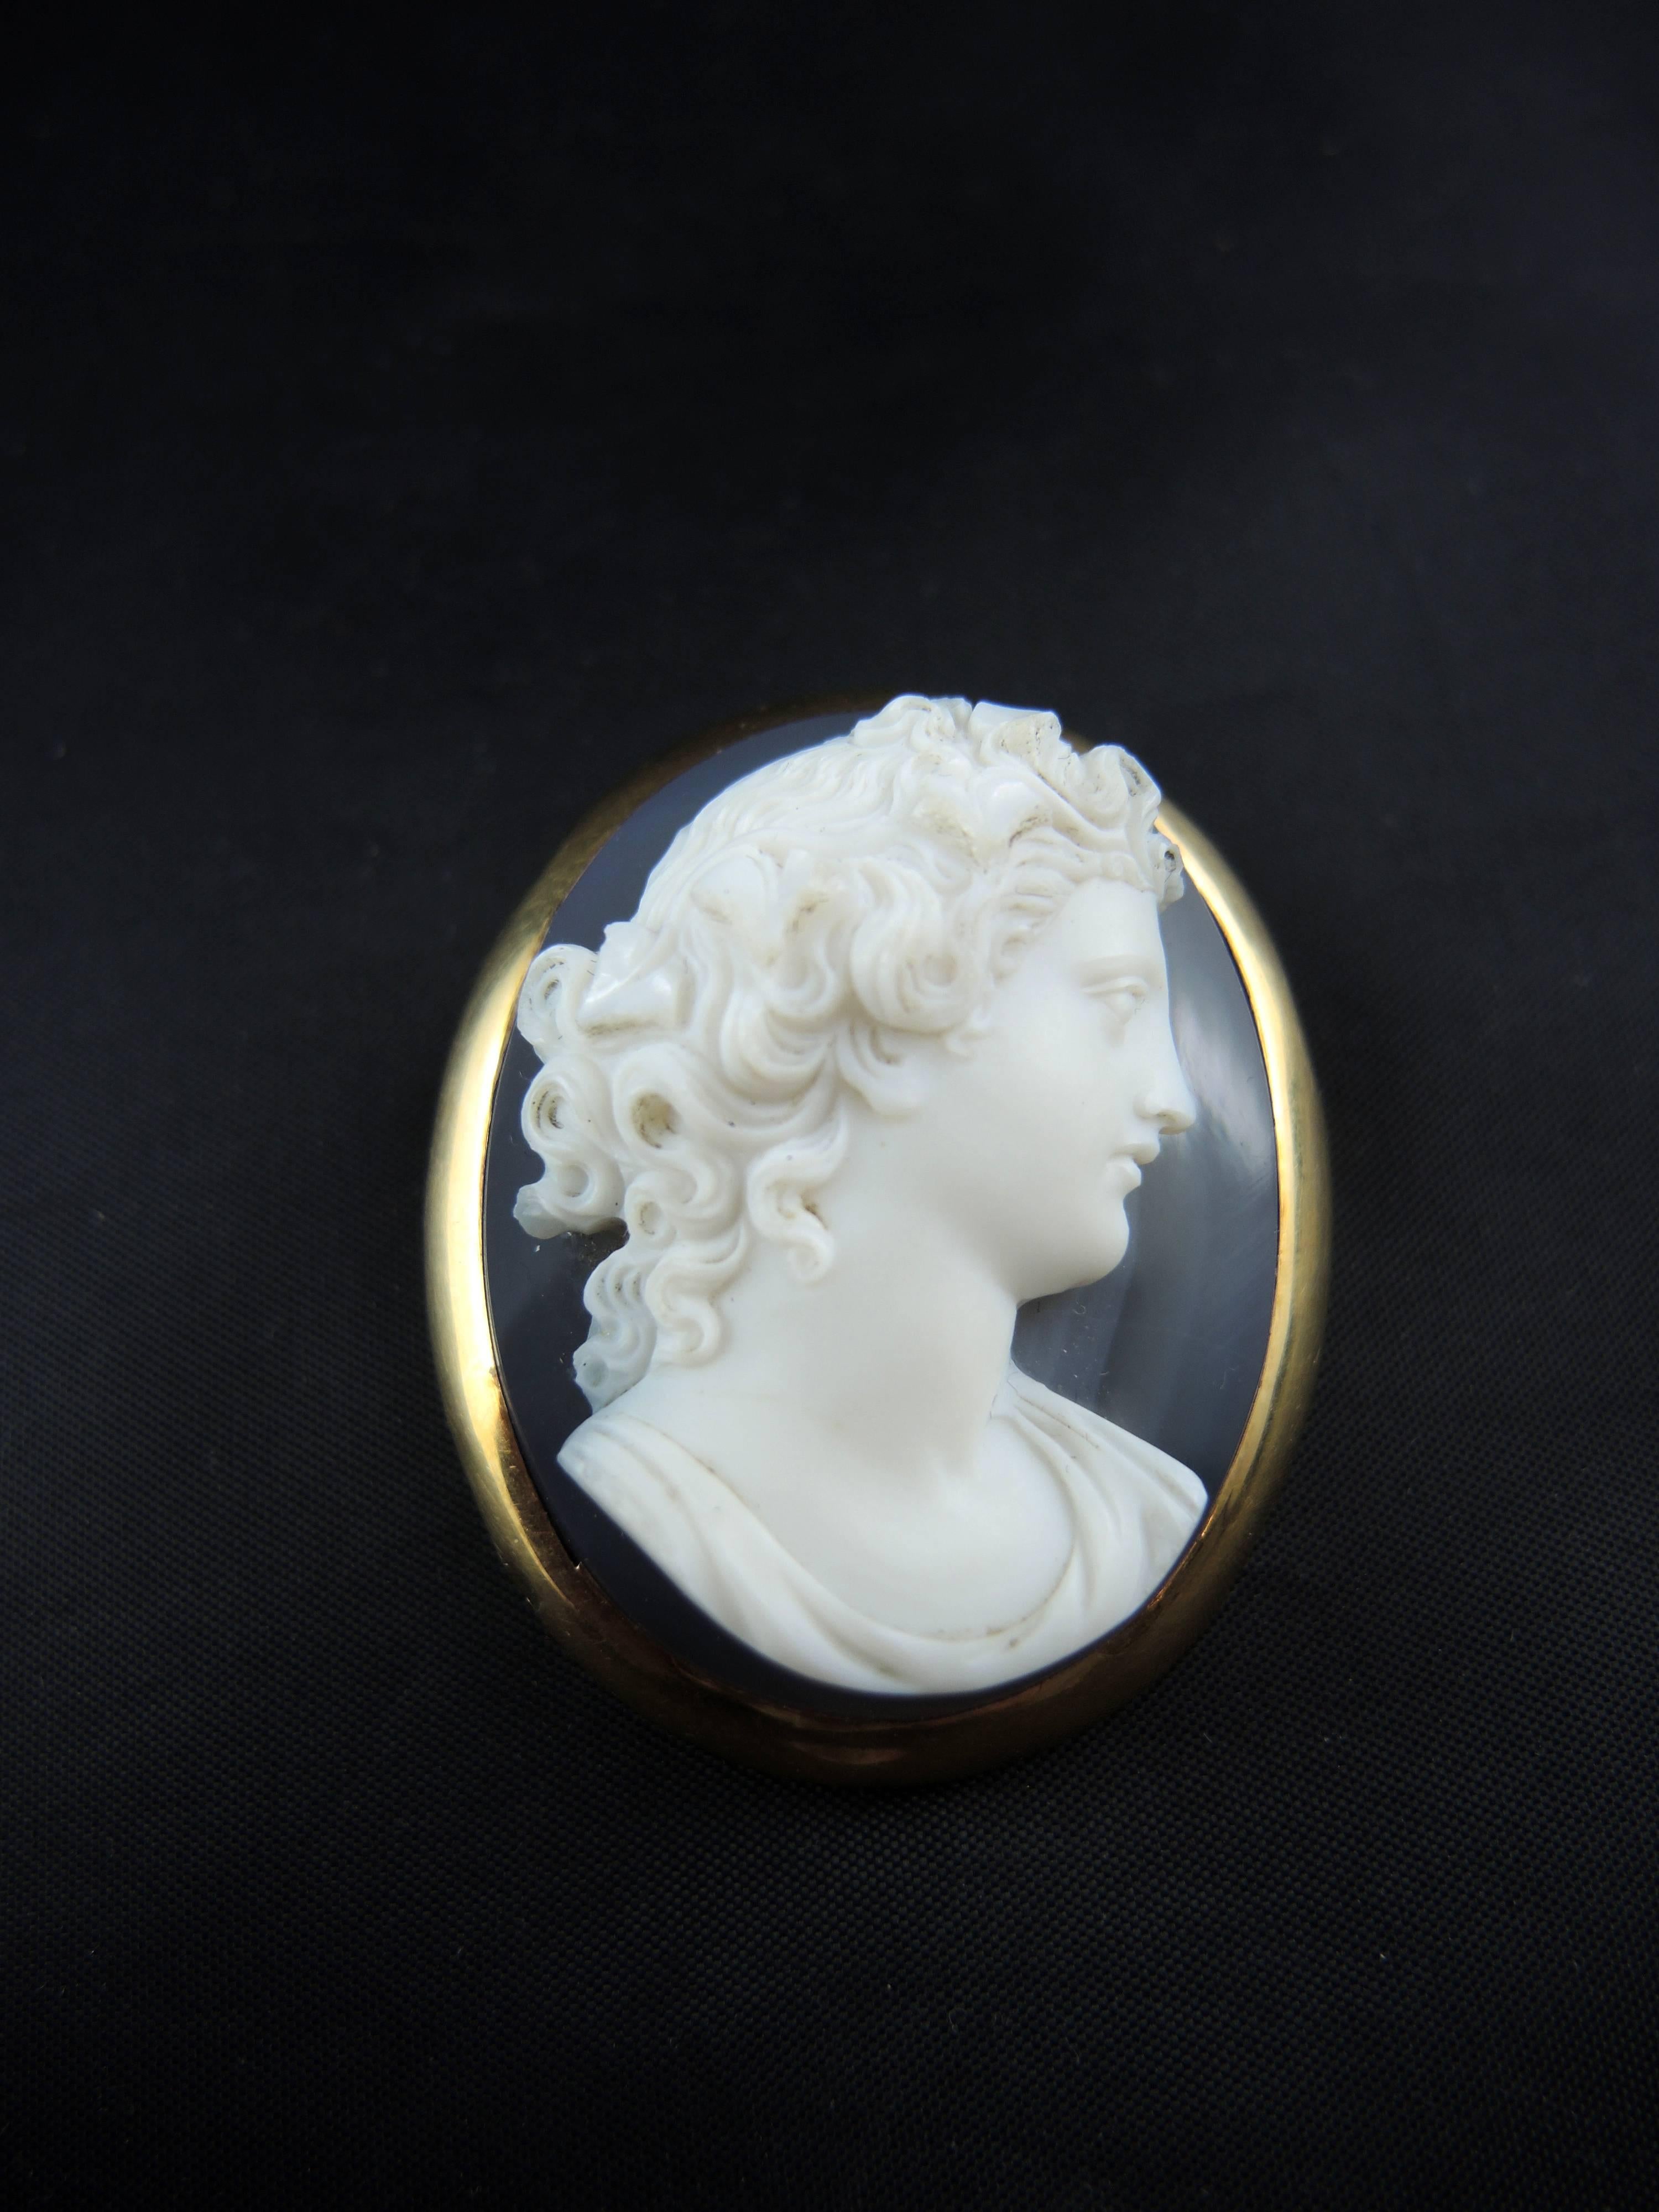 18kt gold brooch (quality mark: owl), set with a superb agate cameo portraying an antique woman.

Work from the 19th century.

Weight: 26,10g
Height: 4,50 cm
Width: 3,60 cm

State : little scratches and bump on the gold parts, visible on the